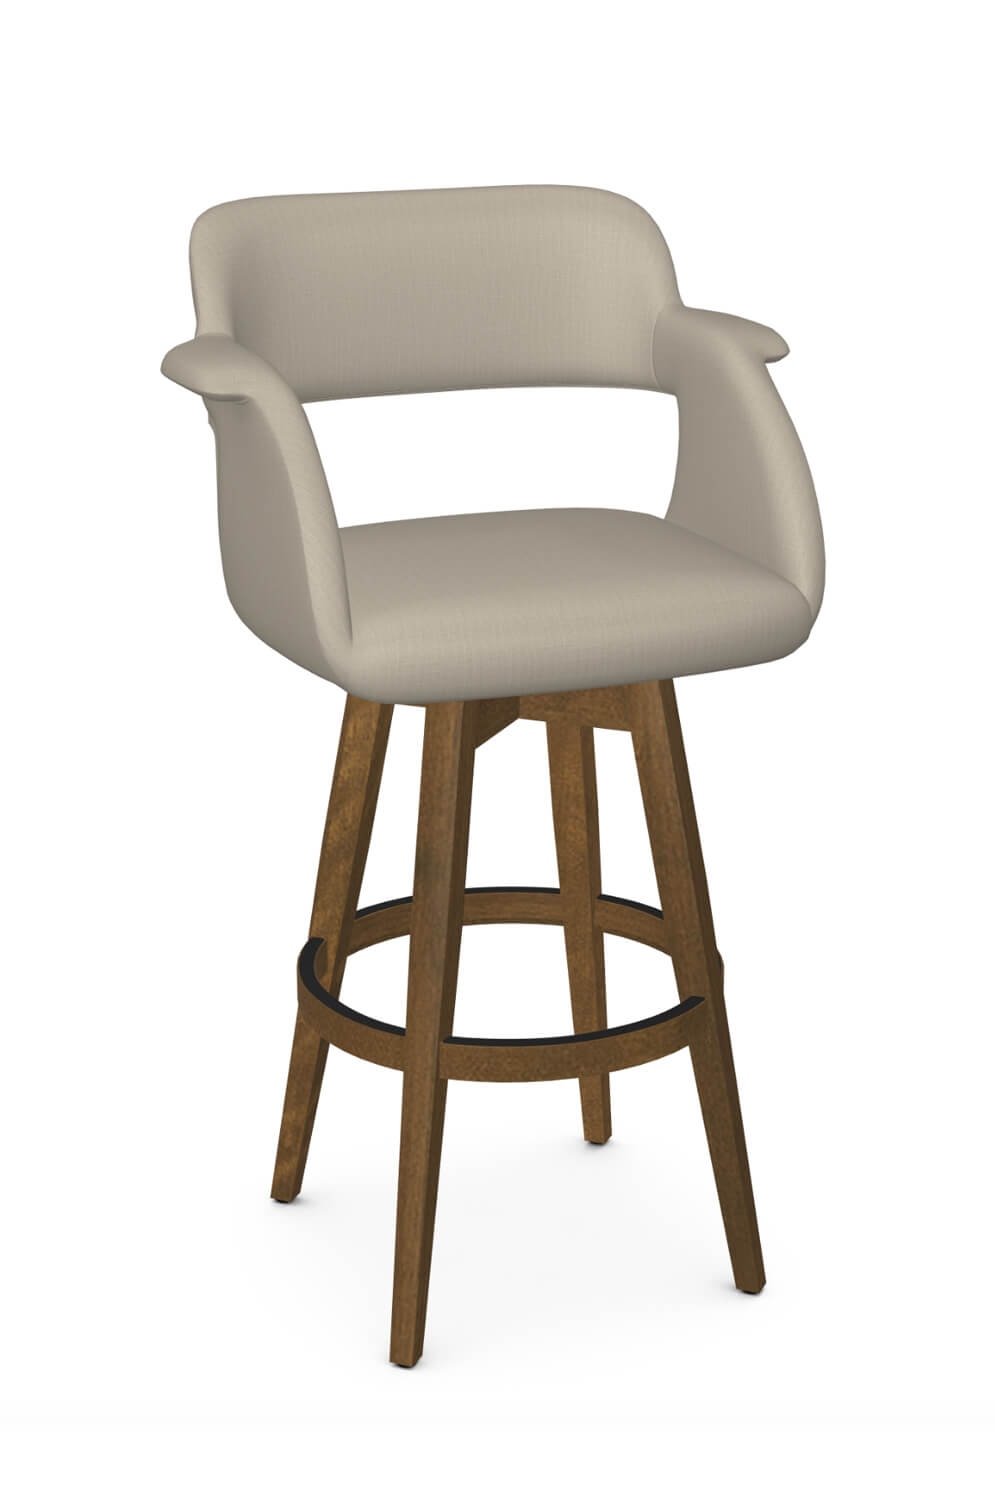 Joshua Upholstered Wood Swivel Stool, Wooden Swivel Bar Stools With Backs And Arms